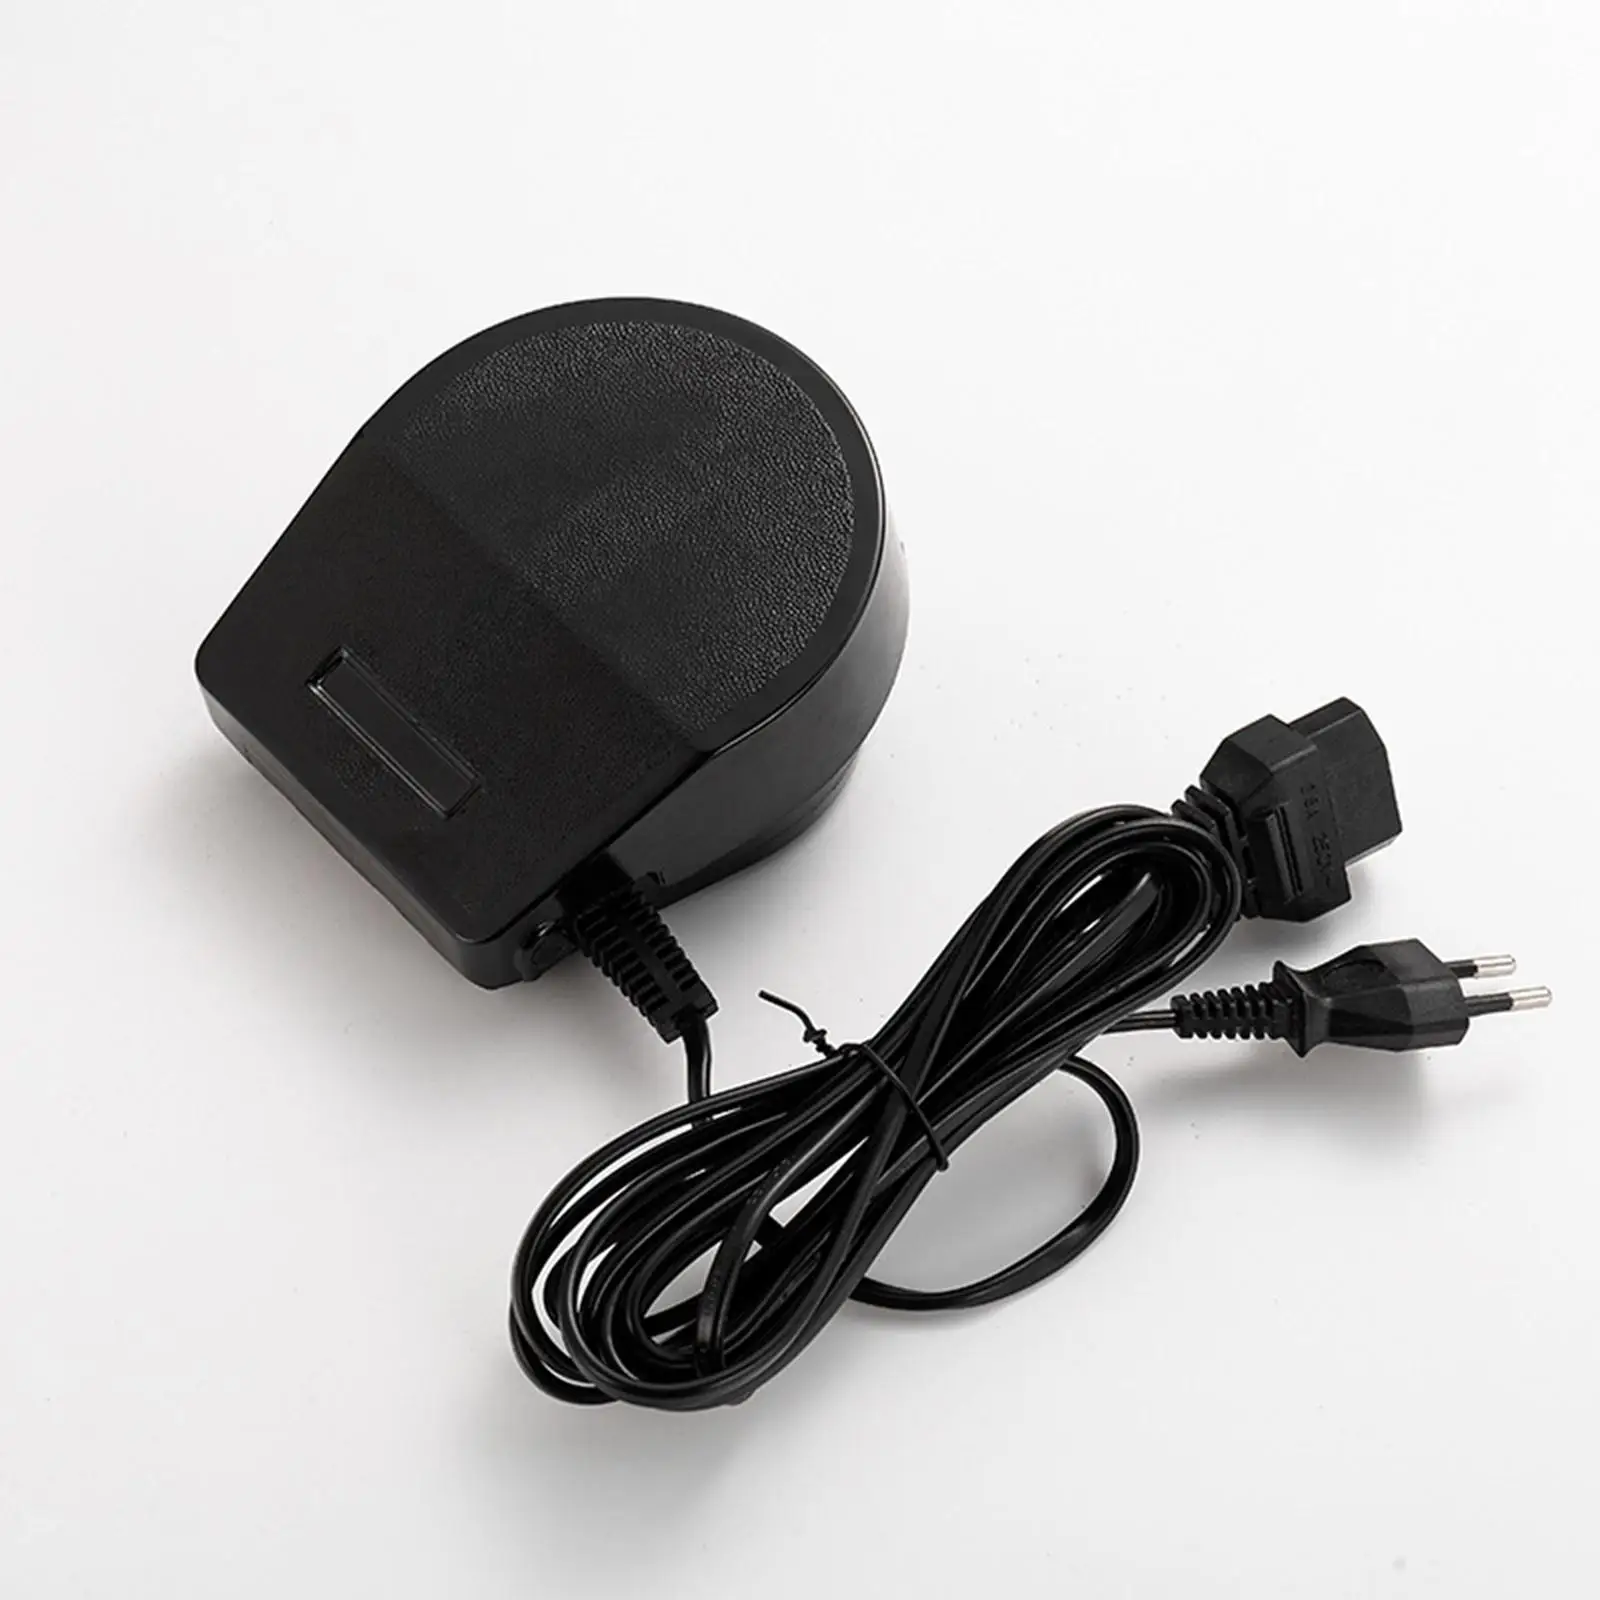 Foot Pedal Speed Controller Durable W/ Cable Easy to Install Anti Slip Sewing Machine Part Sewing Machine Foot Pedal EU